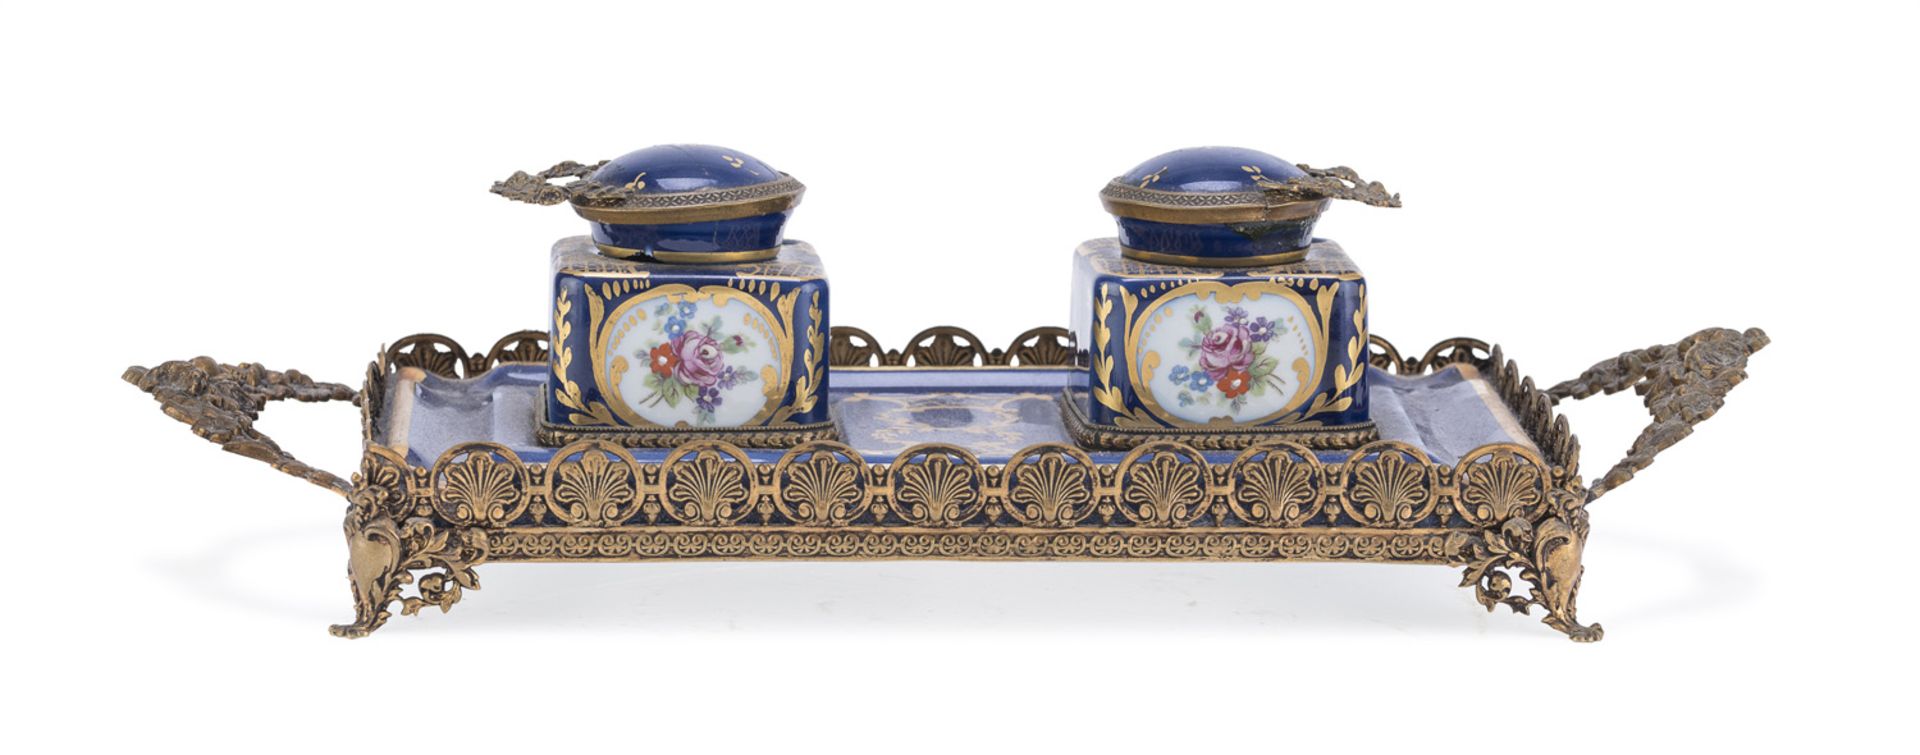 PORCELAIN INKWELL LIMOGES 20th CENTURY